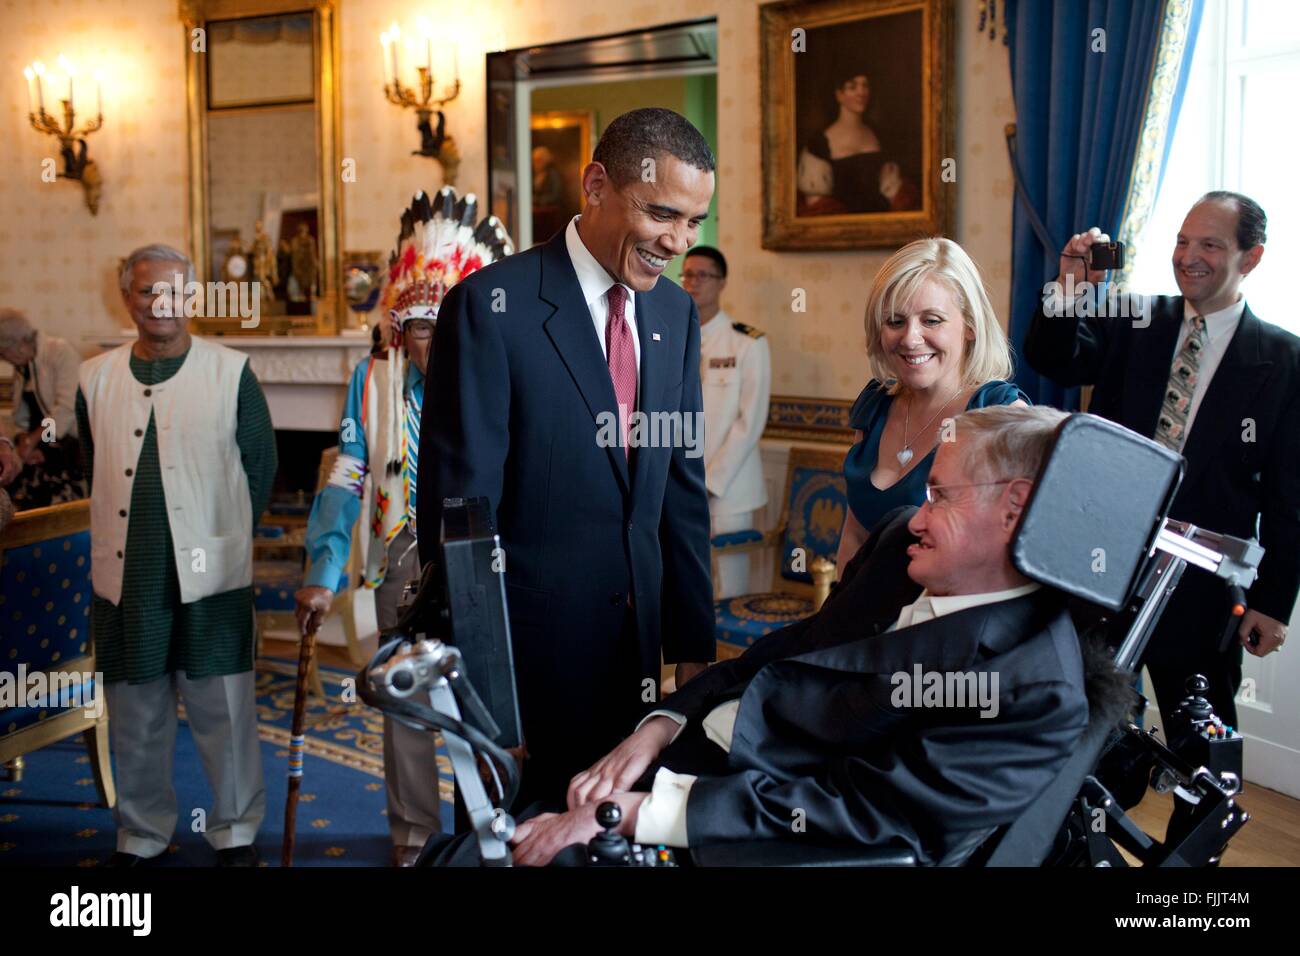 U.S. President Barack Obama talks with Prof. Stephen Hawking before a ceremony presenting him and 15 others the Presidential Medal of Freedom in the Blue Room of the White House August 12, 2009 in Washington, DC. The Medal of Freedom is the nation's highest civilian honor. Stock Photo